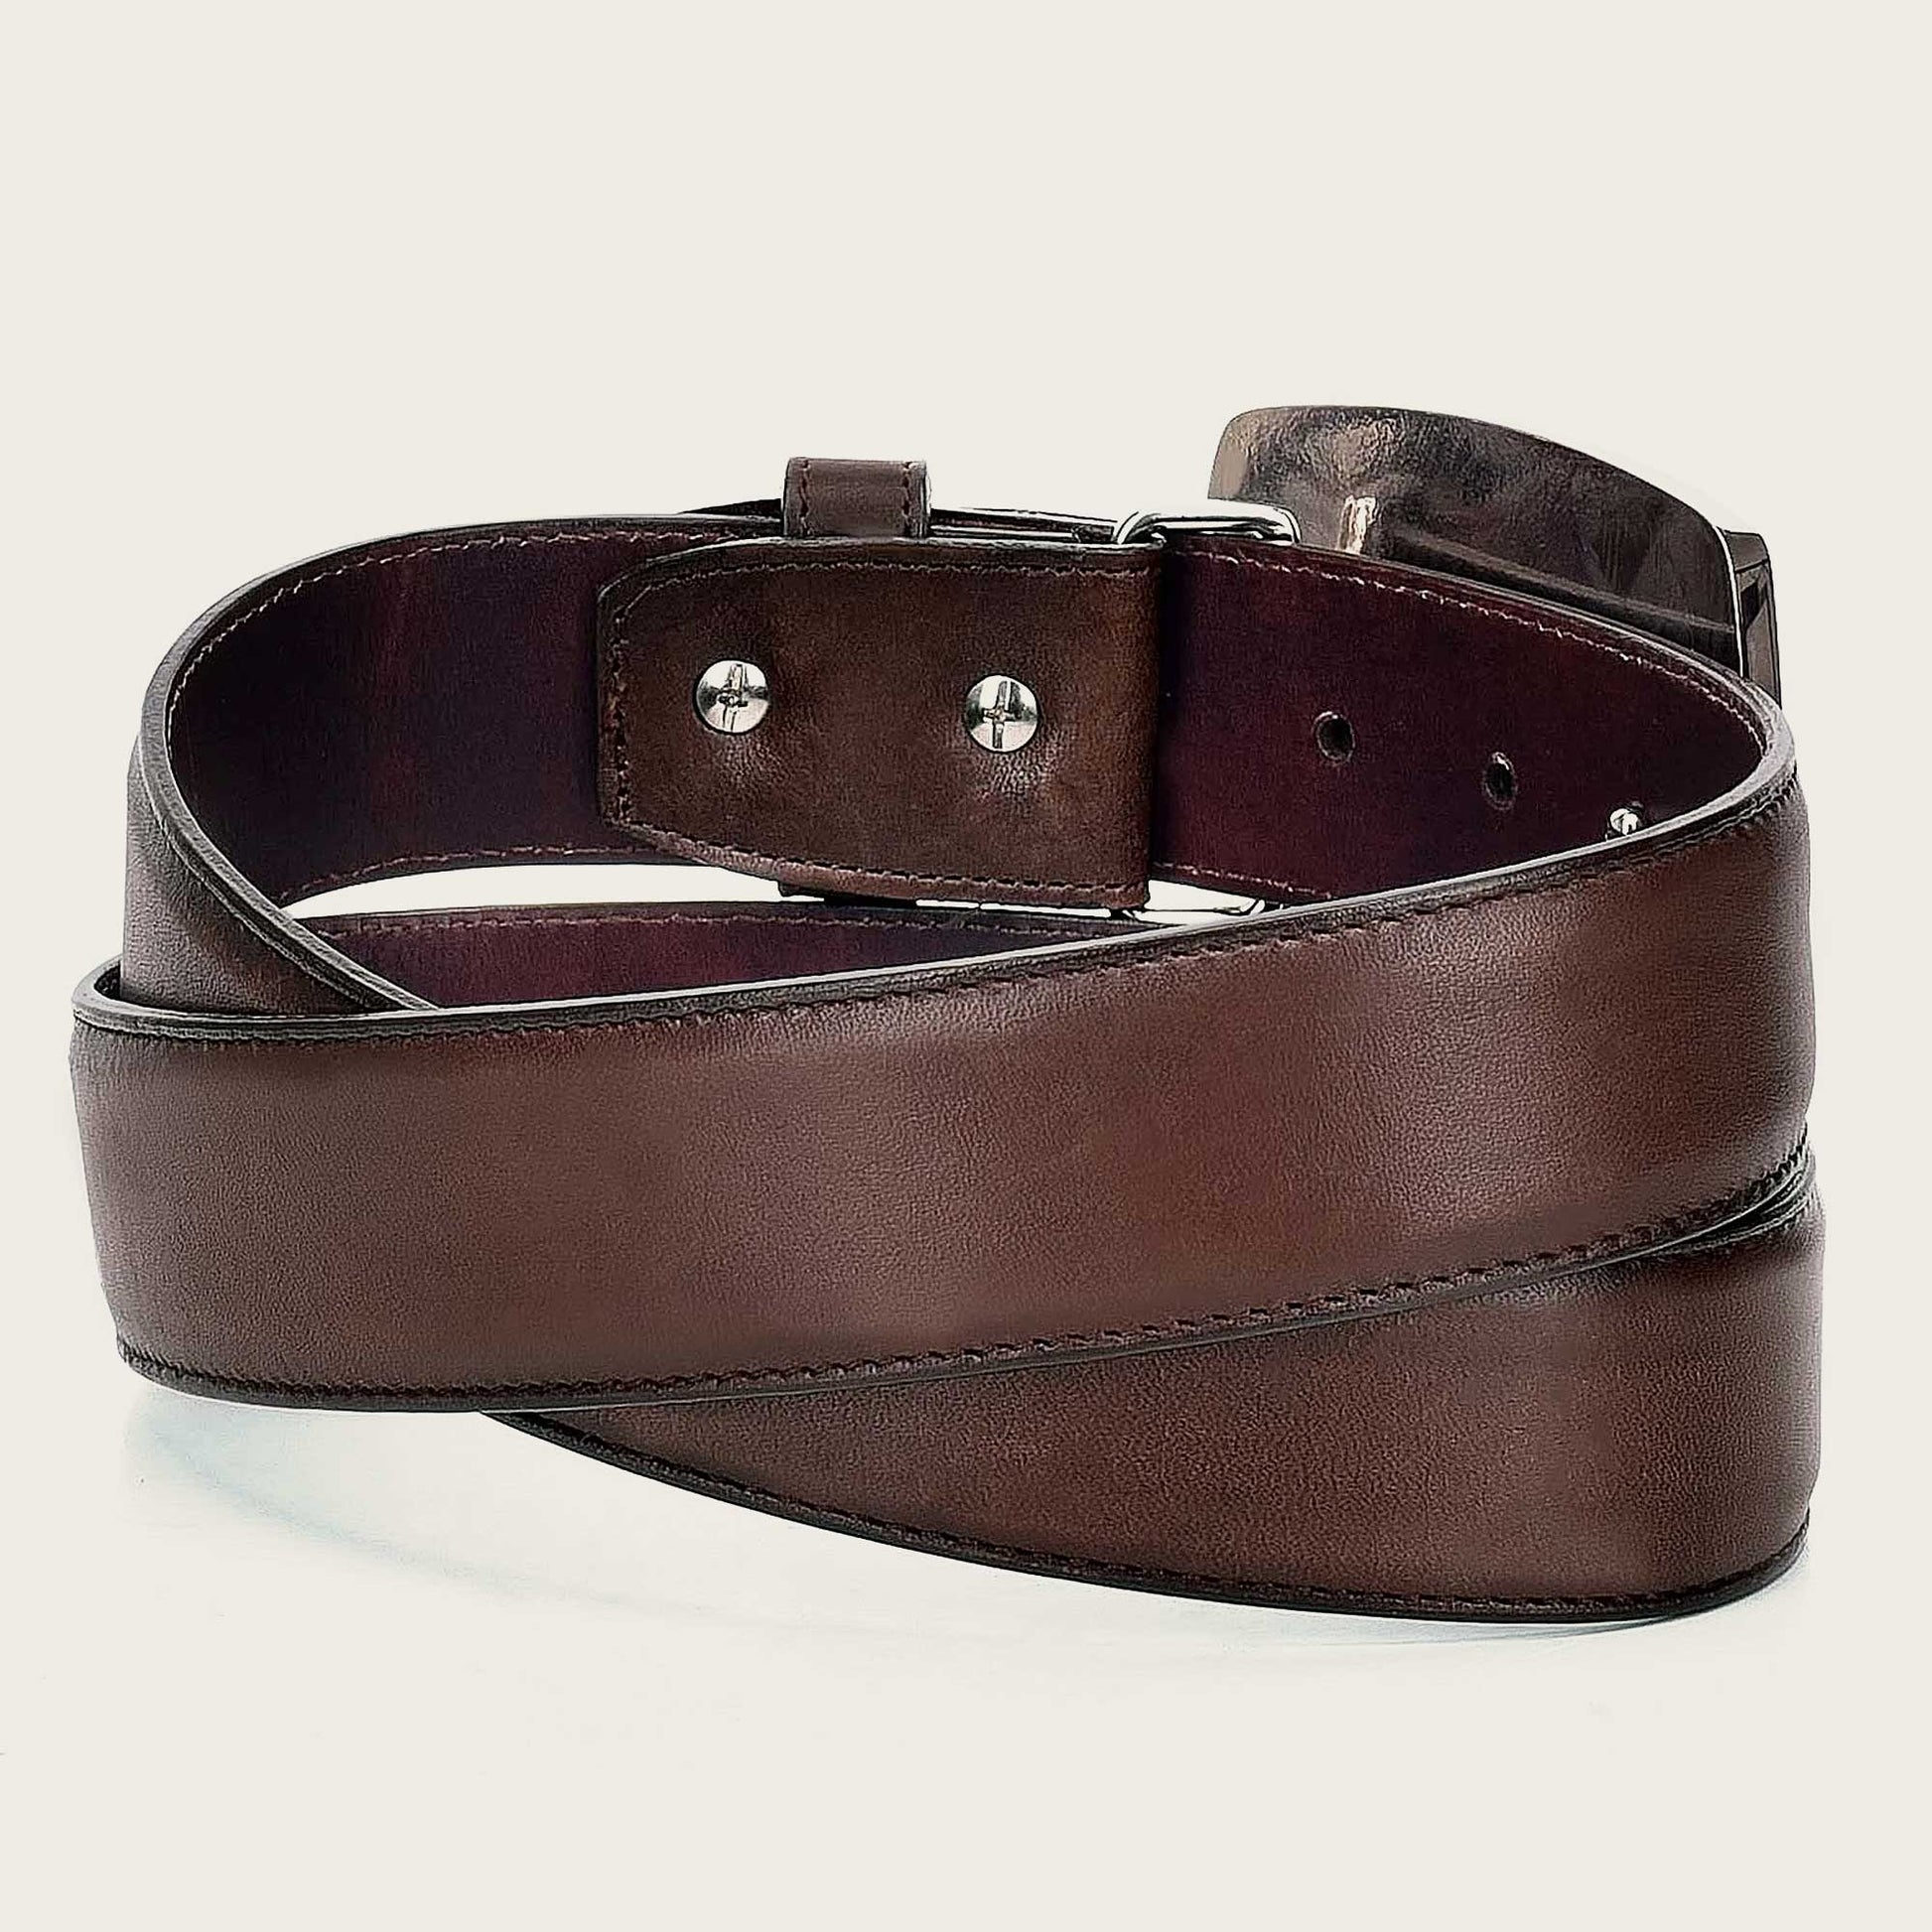 Lv Set - Belts And Wallets - AB Creations - Clothing Shop